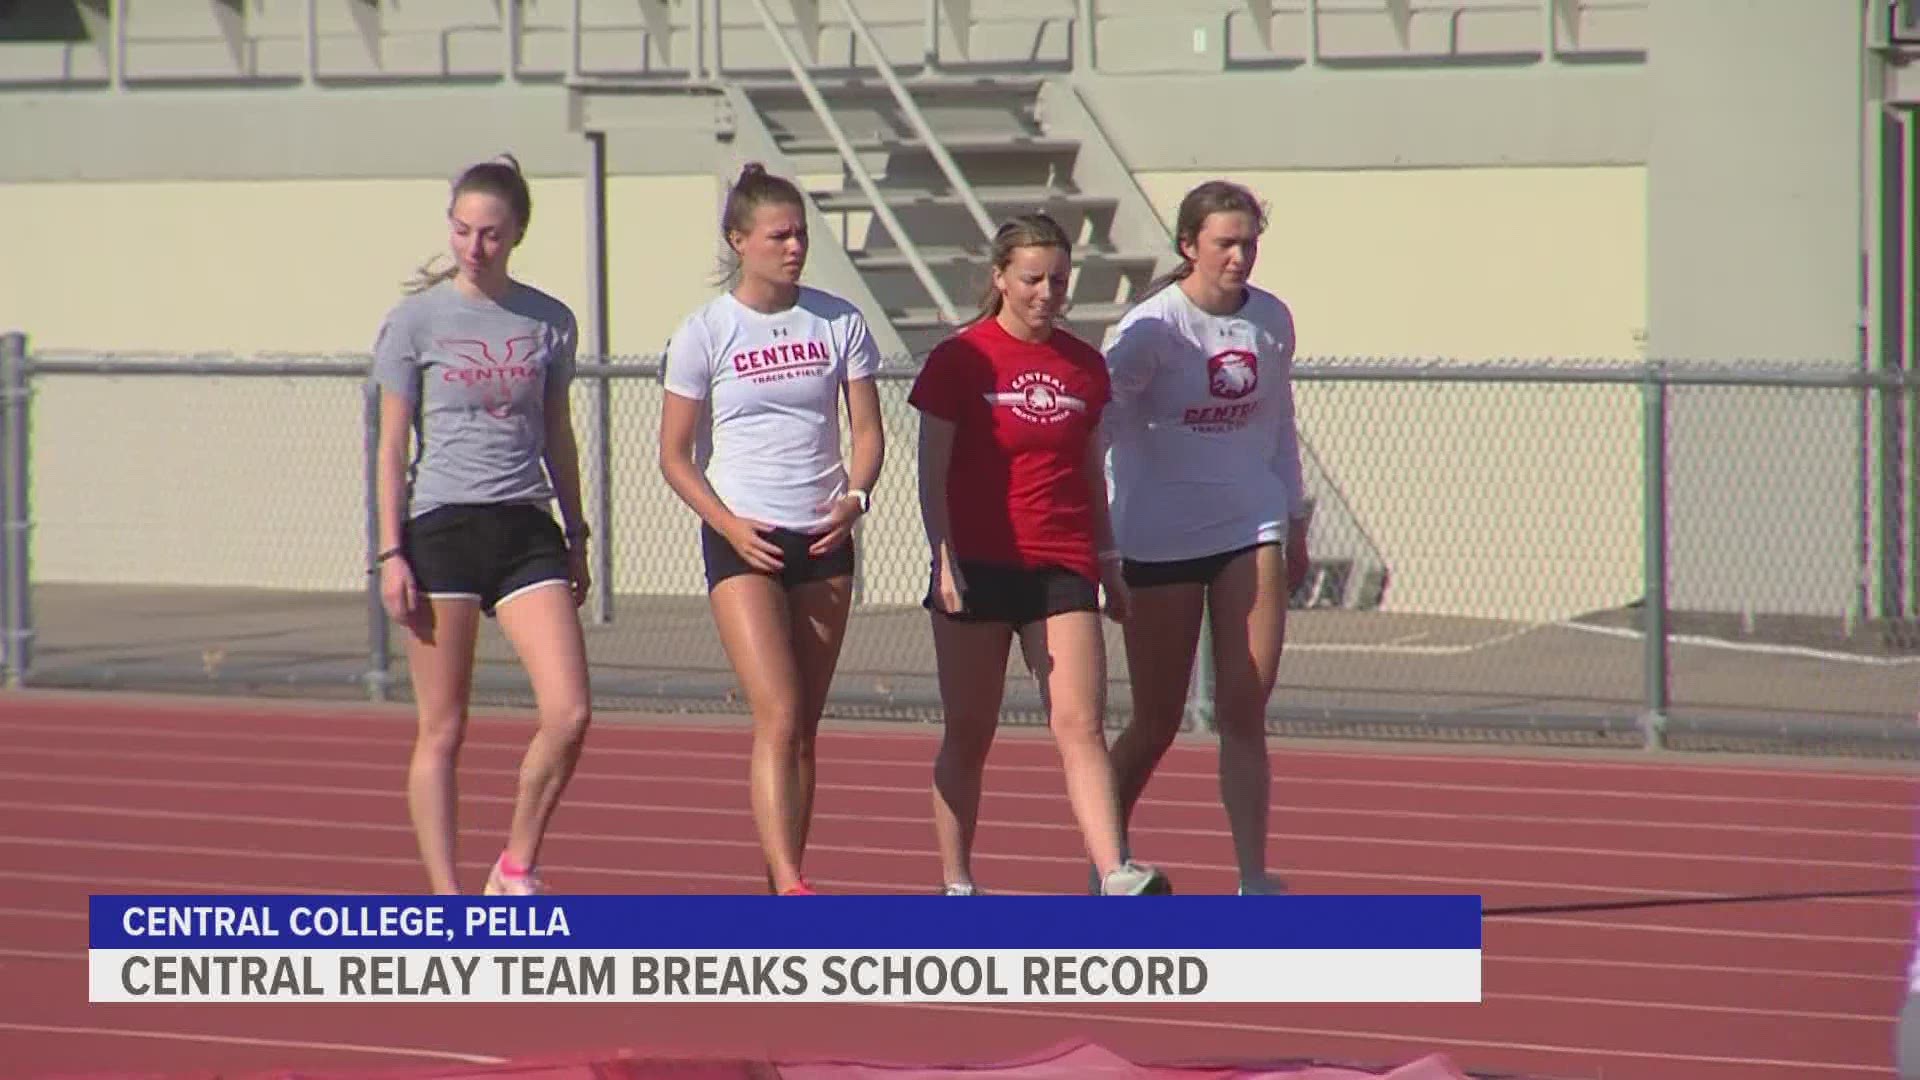 The distance medley relay team recently broke a school record and they could just be getting started.